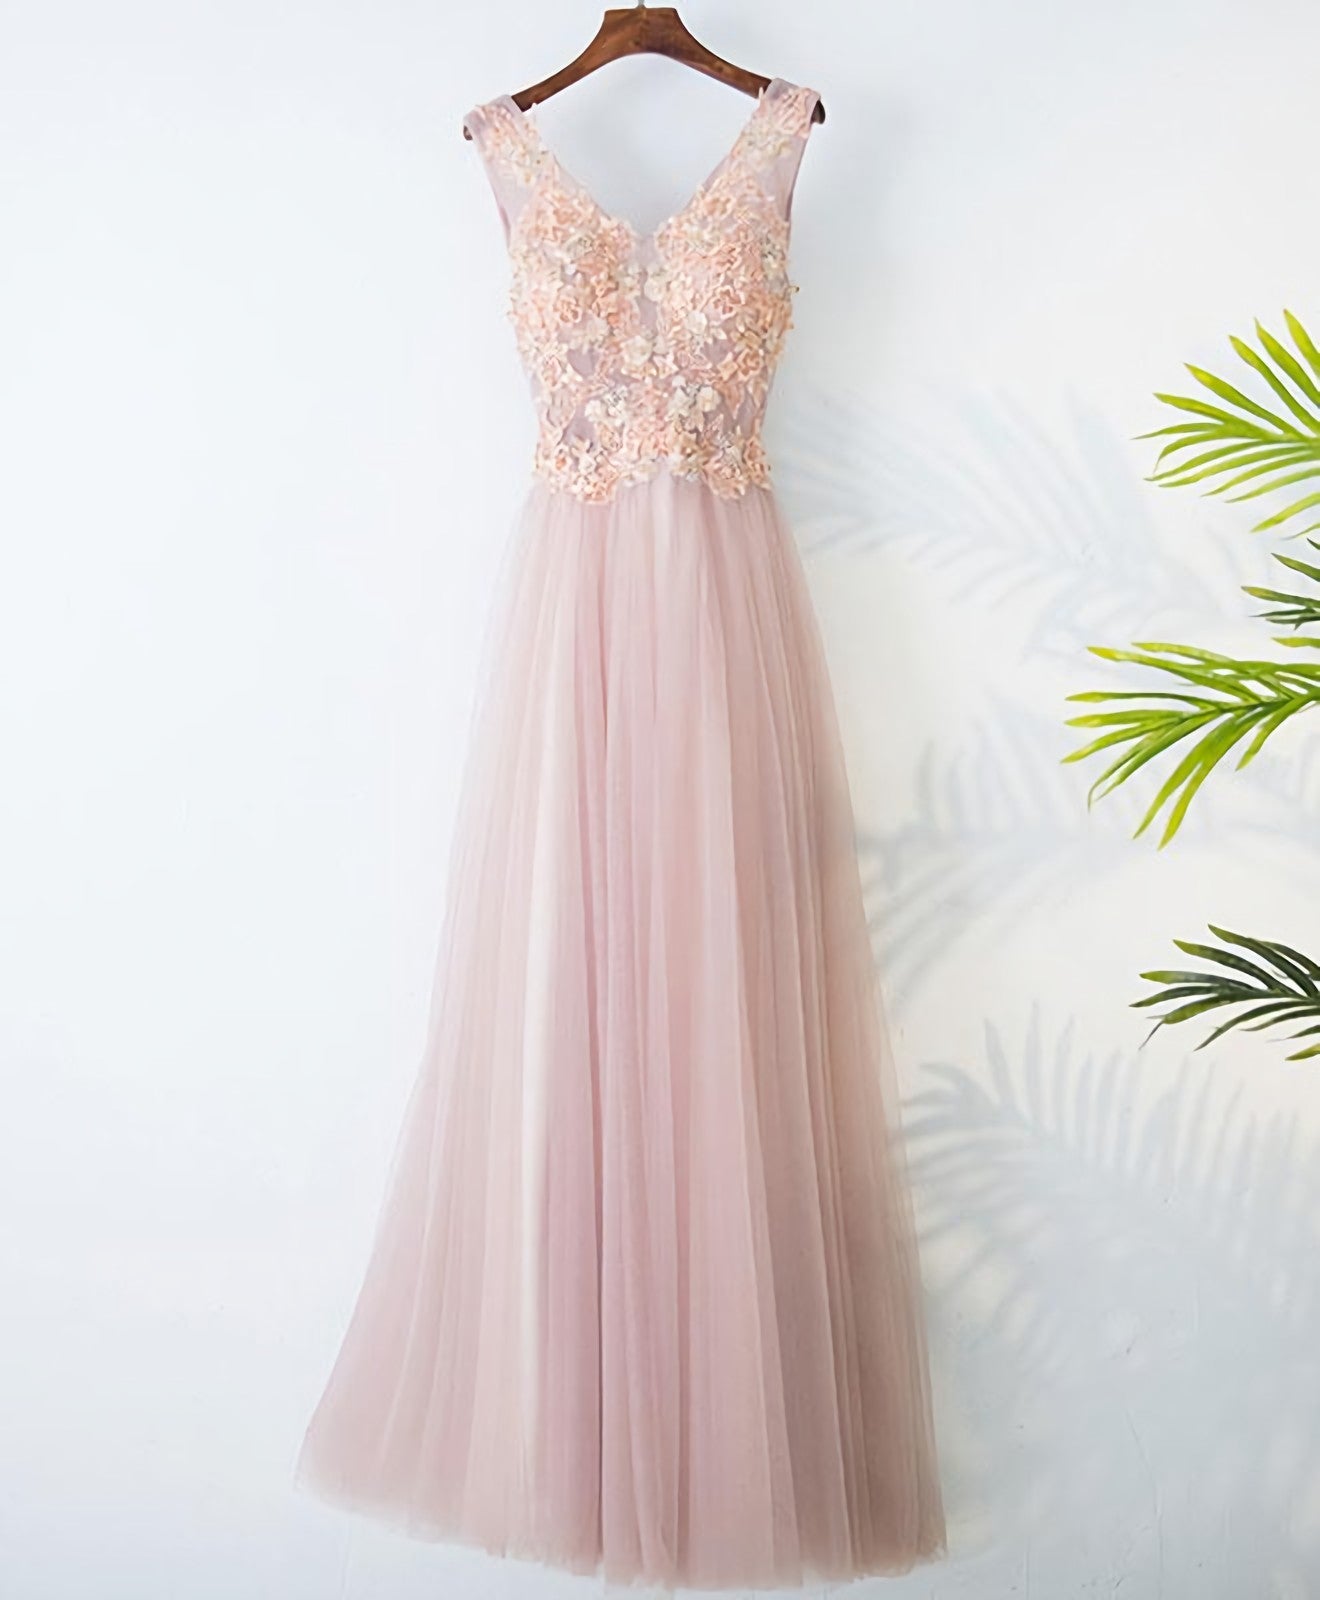 Homecoming Dresses Laces, Pink V Neck Lace Long Prom Dress, Evening Dress